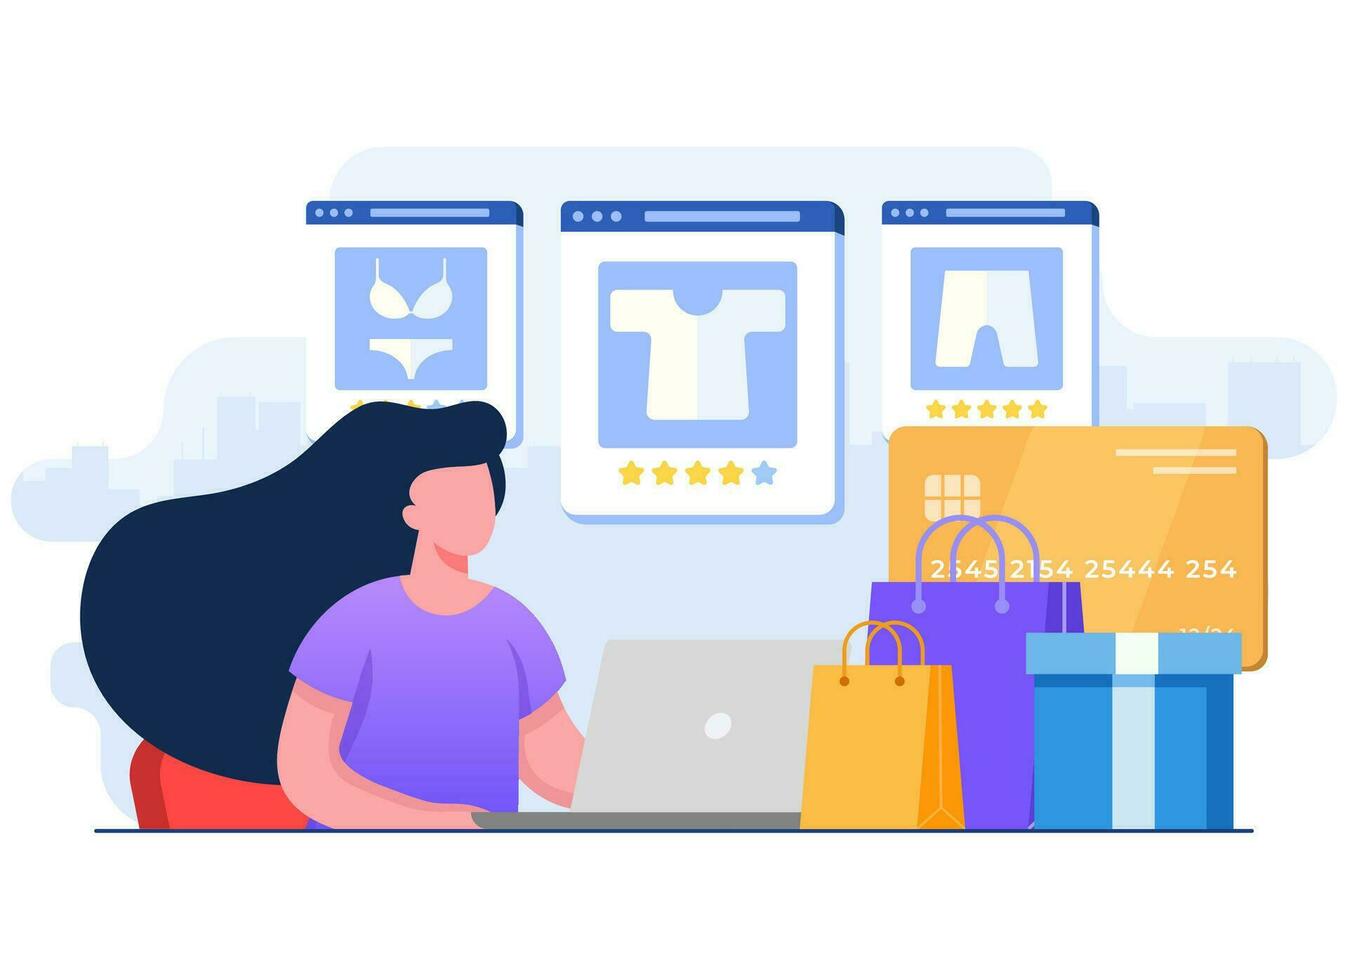 Female character buy clothes online using laptop, Online store, Online shopping, E-commerce website, Digital or virtual marketplace flat illustration for landing page, web design, infographic vector